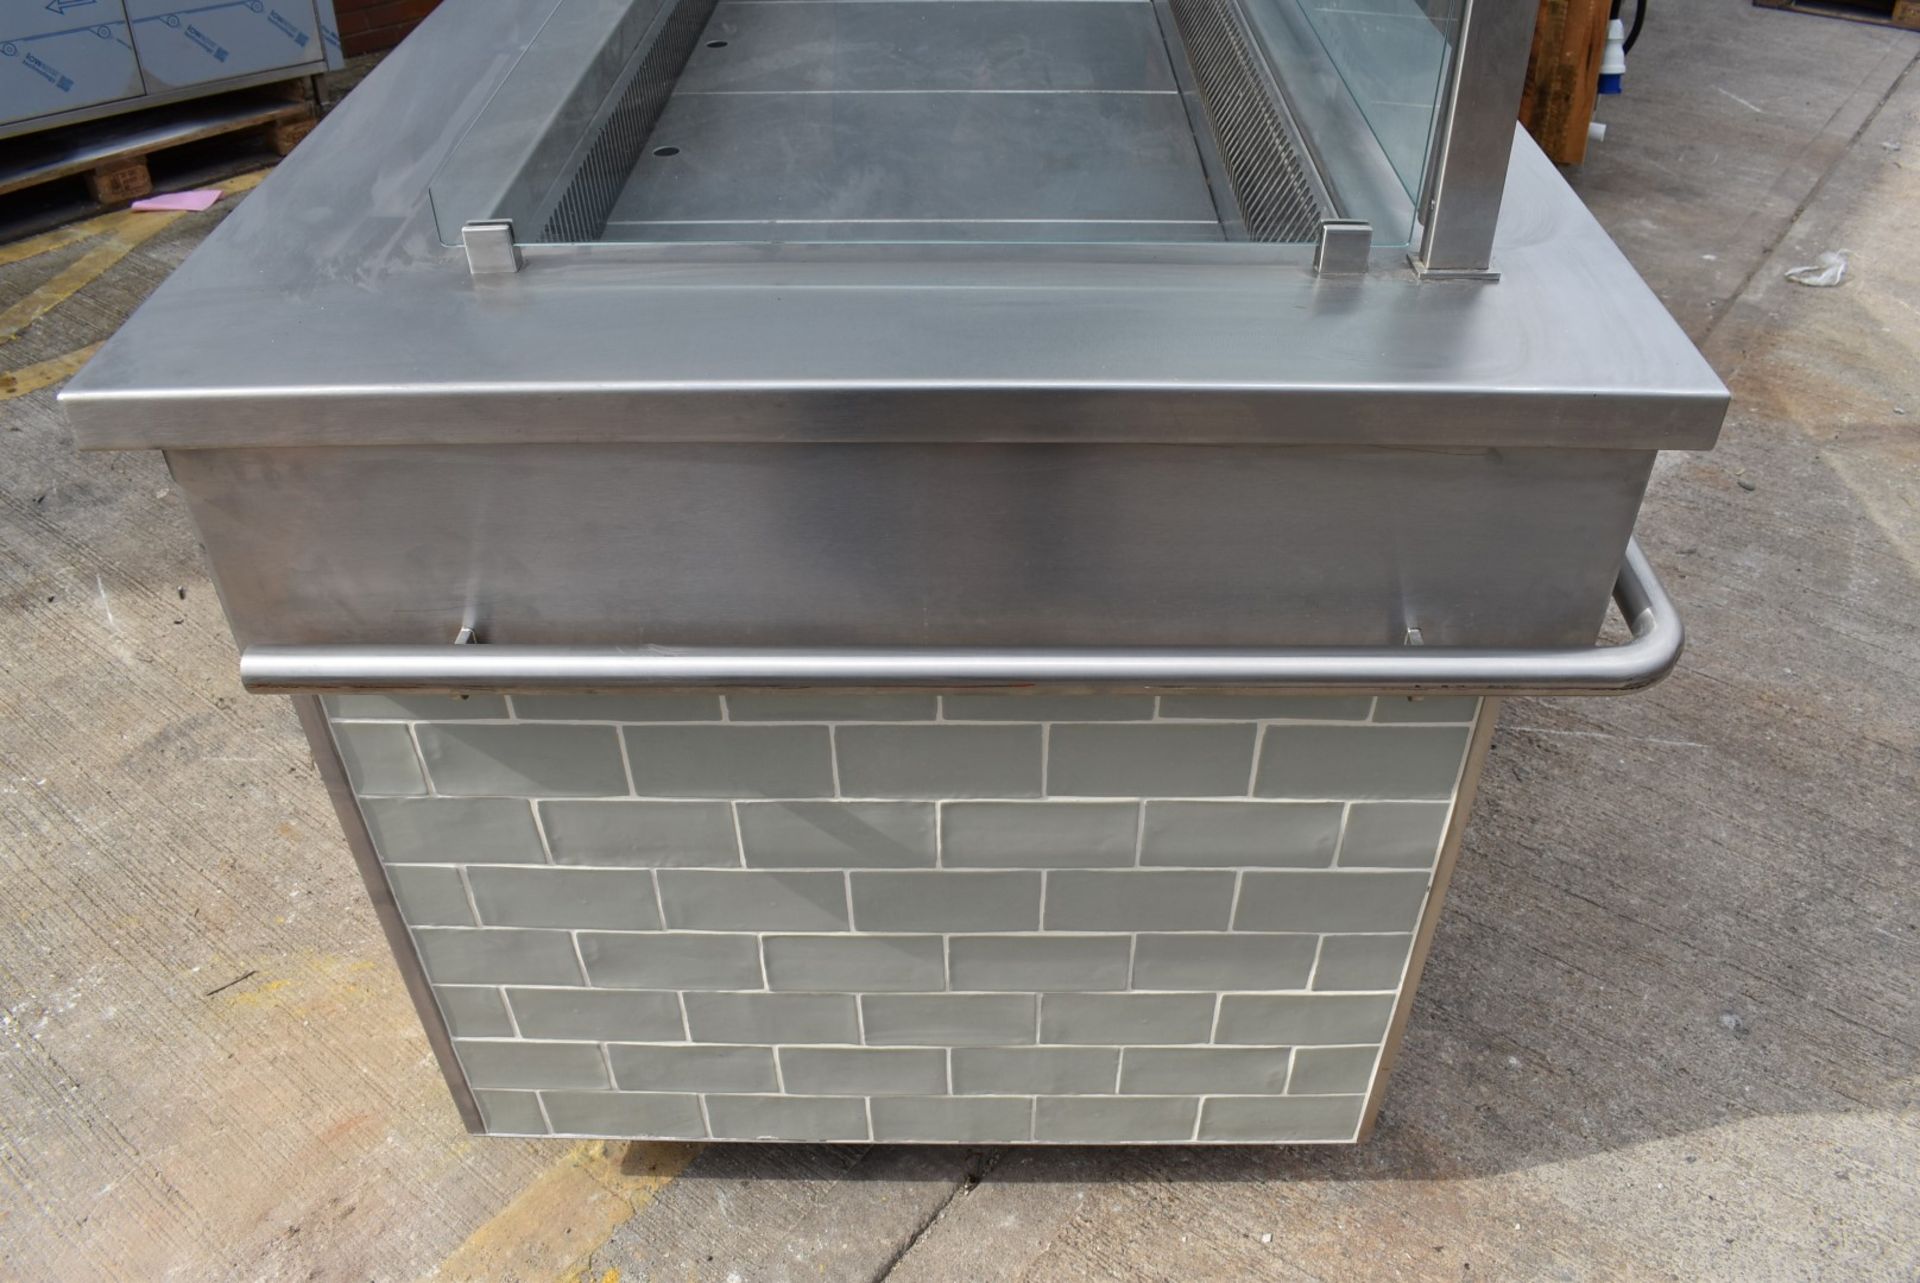 1 x Commercial Food Display Counter Featuring a Fan Blown Well, Glass Viewing Screen, Tiles Front - Image 3 of 60